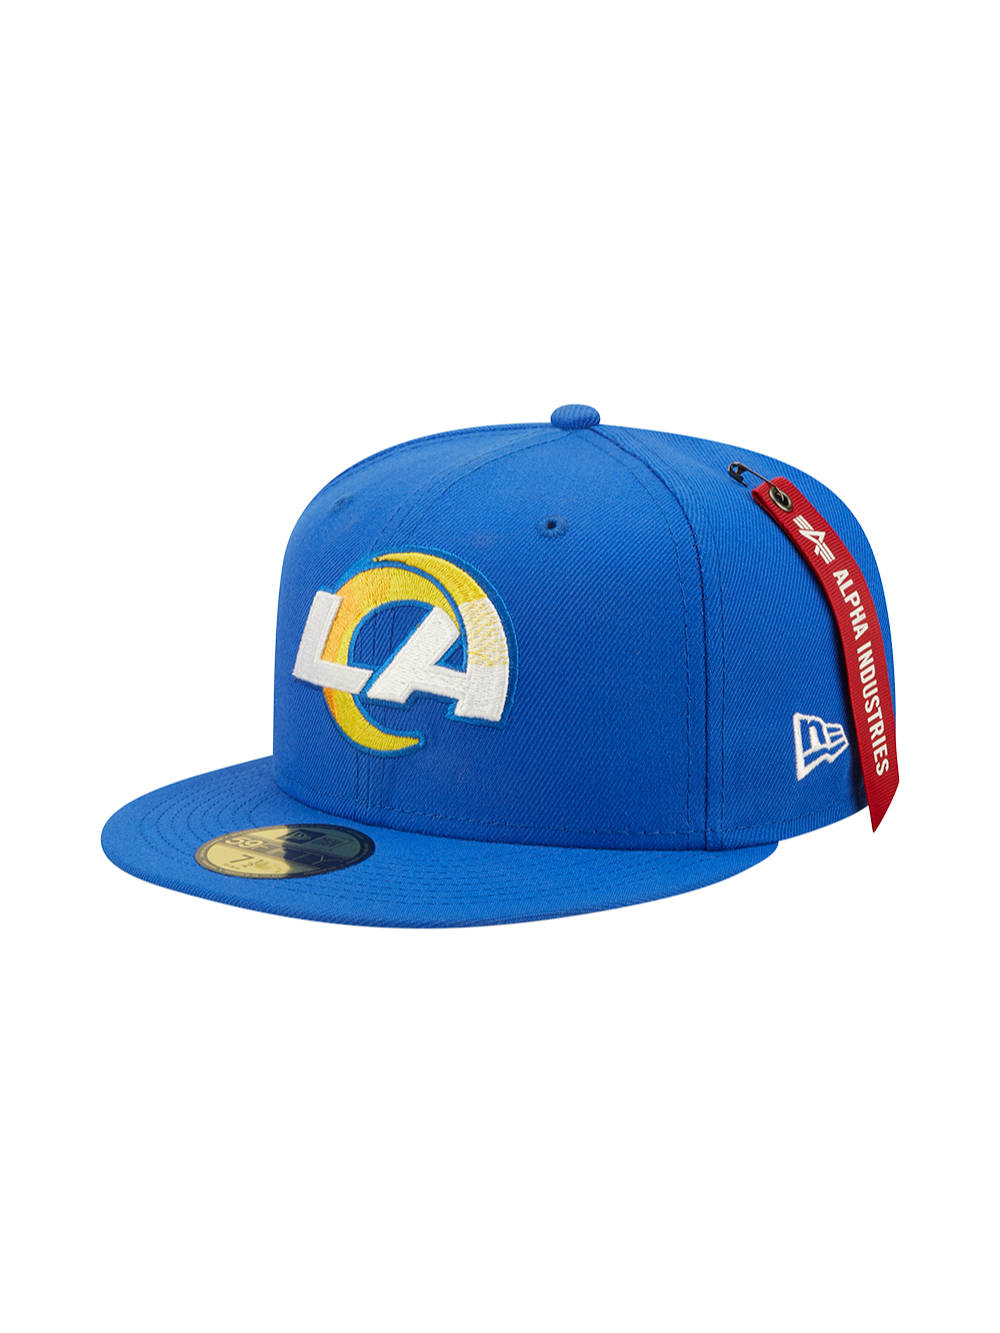 LOS ANGELES RAMS X ALPHA X NEW ERA 59FIFTY FITTED CAP ACCESSORY Alpha Industries BRIGHT BLUE 7 